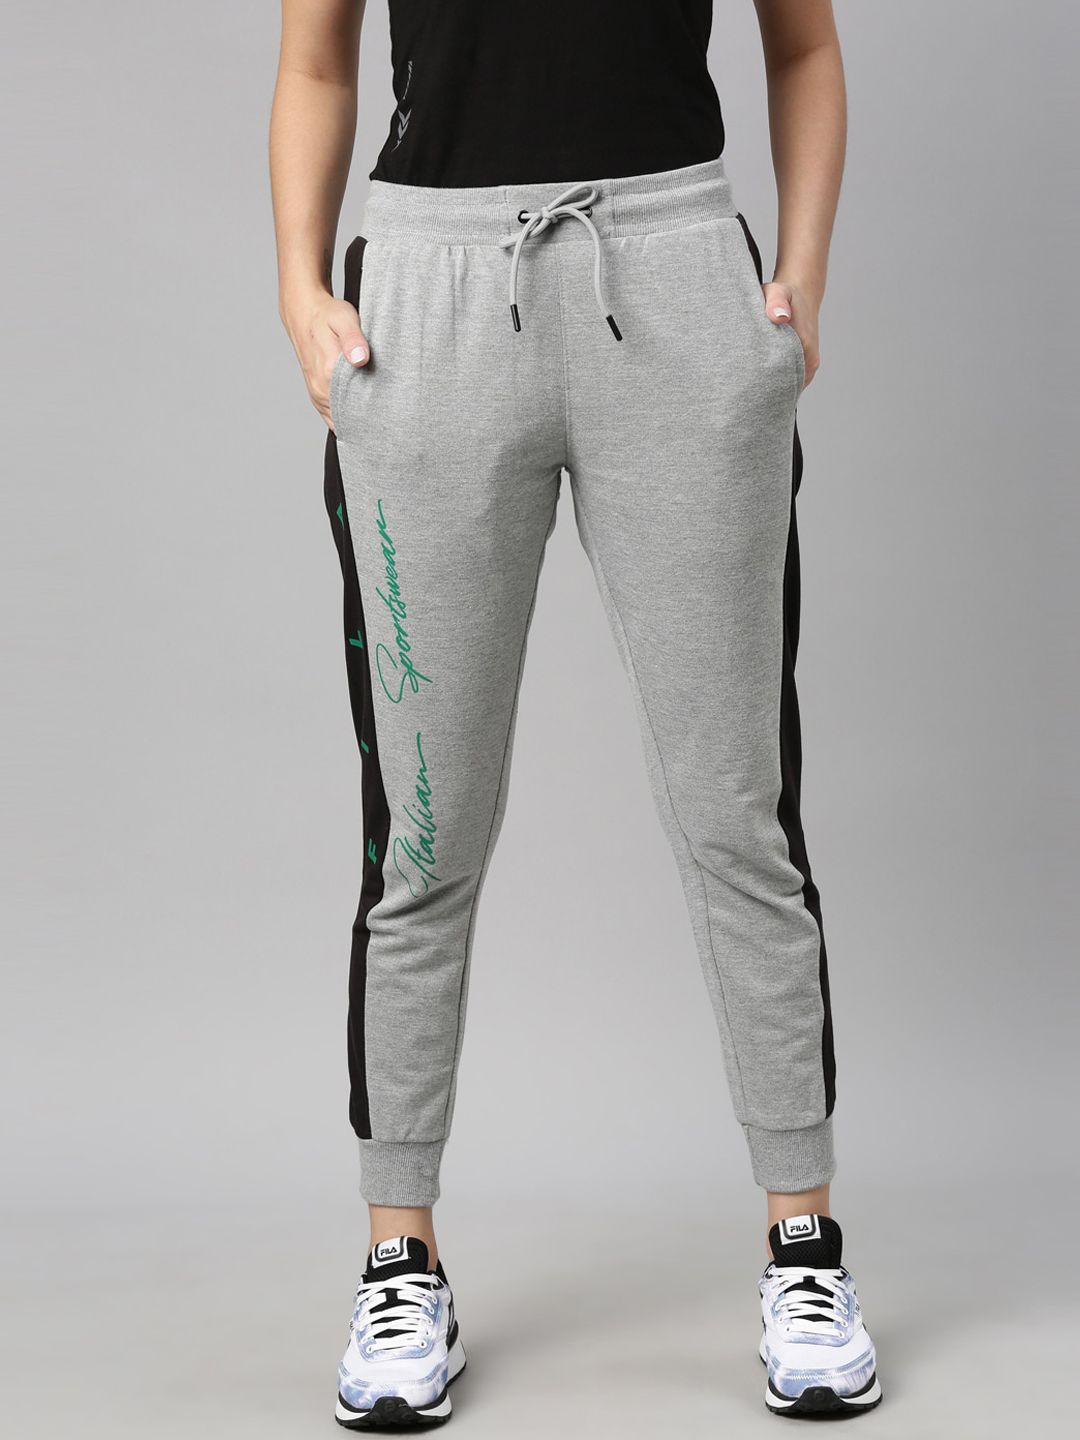 FILA Women Grey Solid Cotton Joggers Price in India